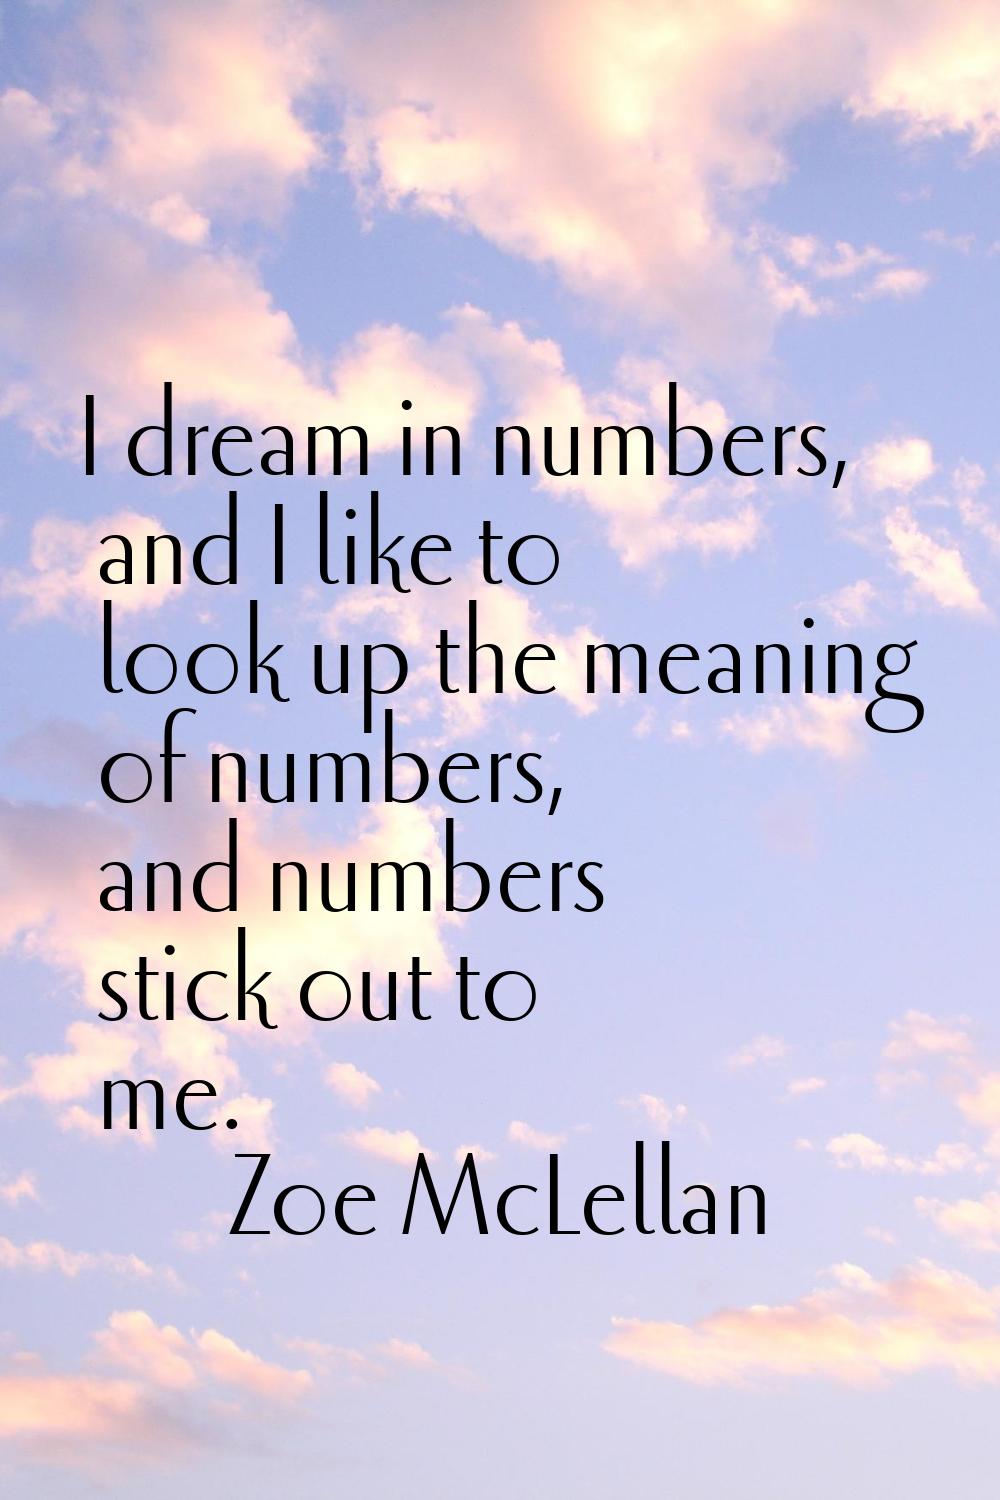 I dream in numbers, and I like to look up the meaning of numbers, and numbers stick out to me.